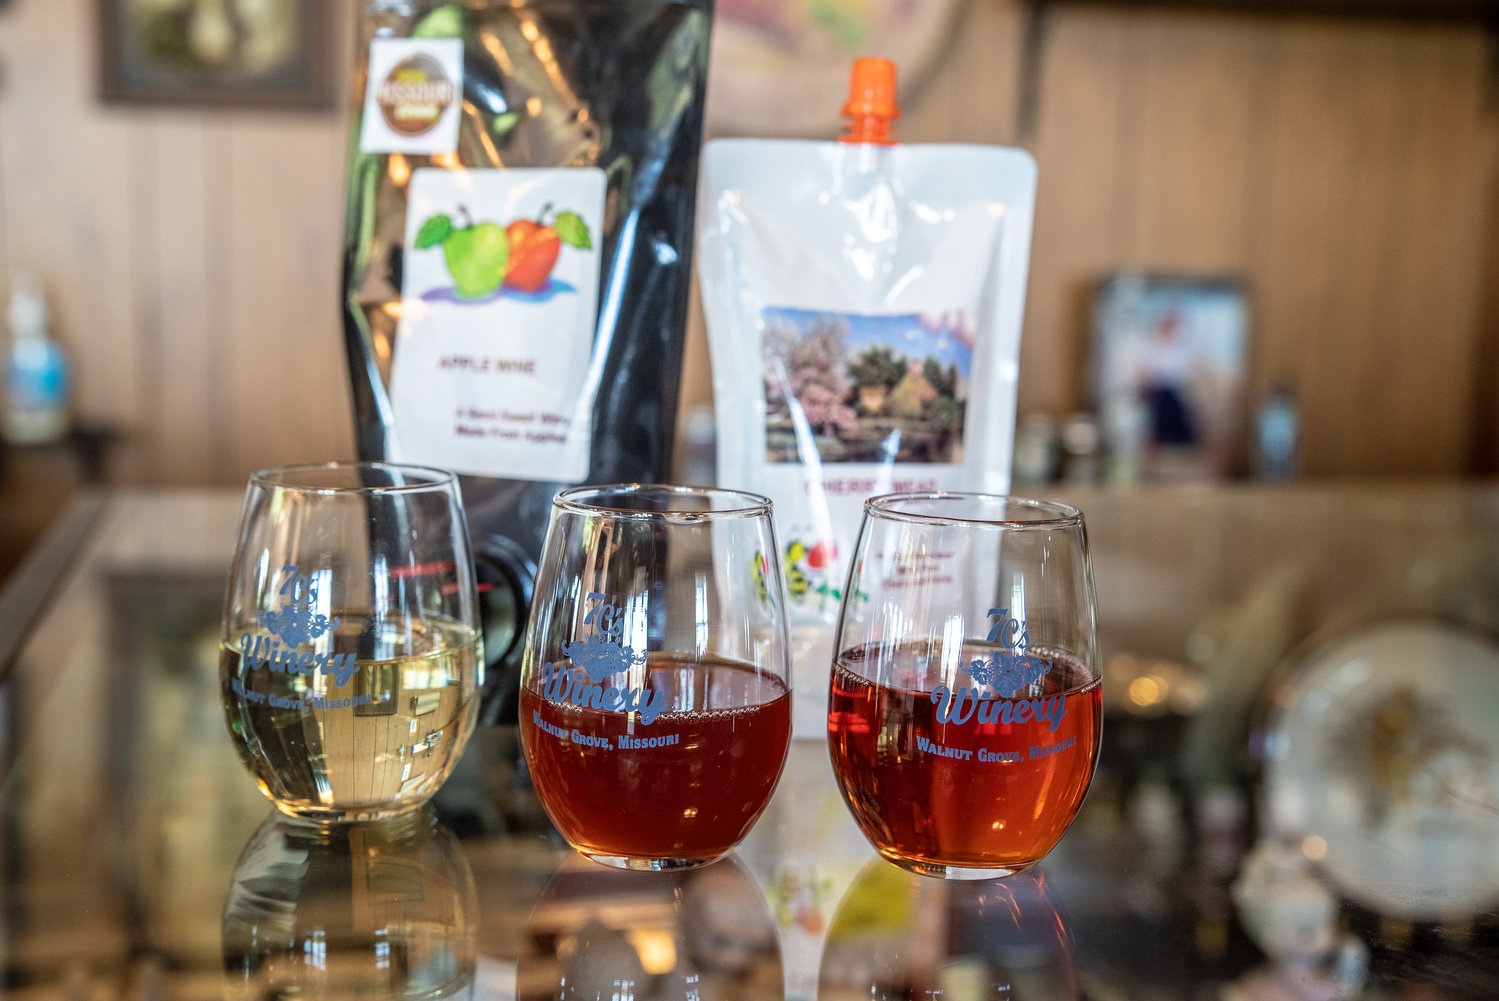 7 Cs Winery is among participating venues in this year’s Ozarks Tap and Pour Craft Beverage Tour.